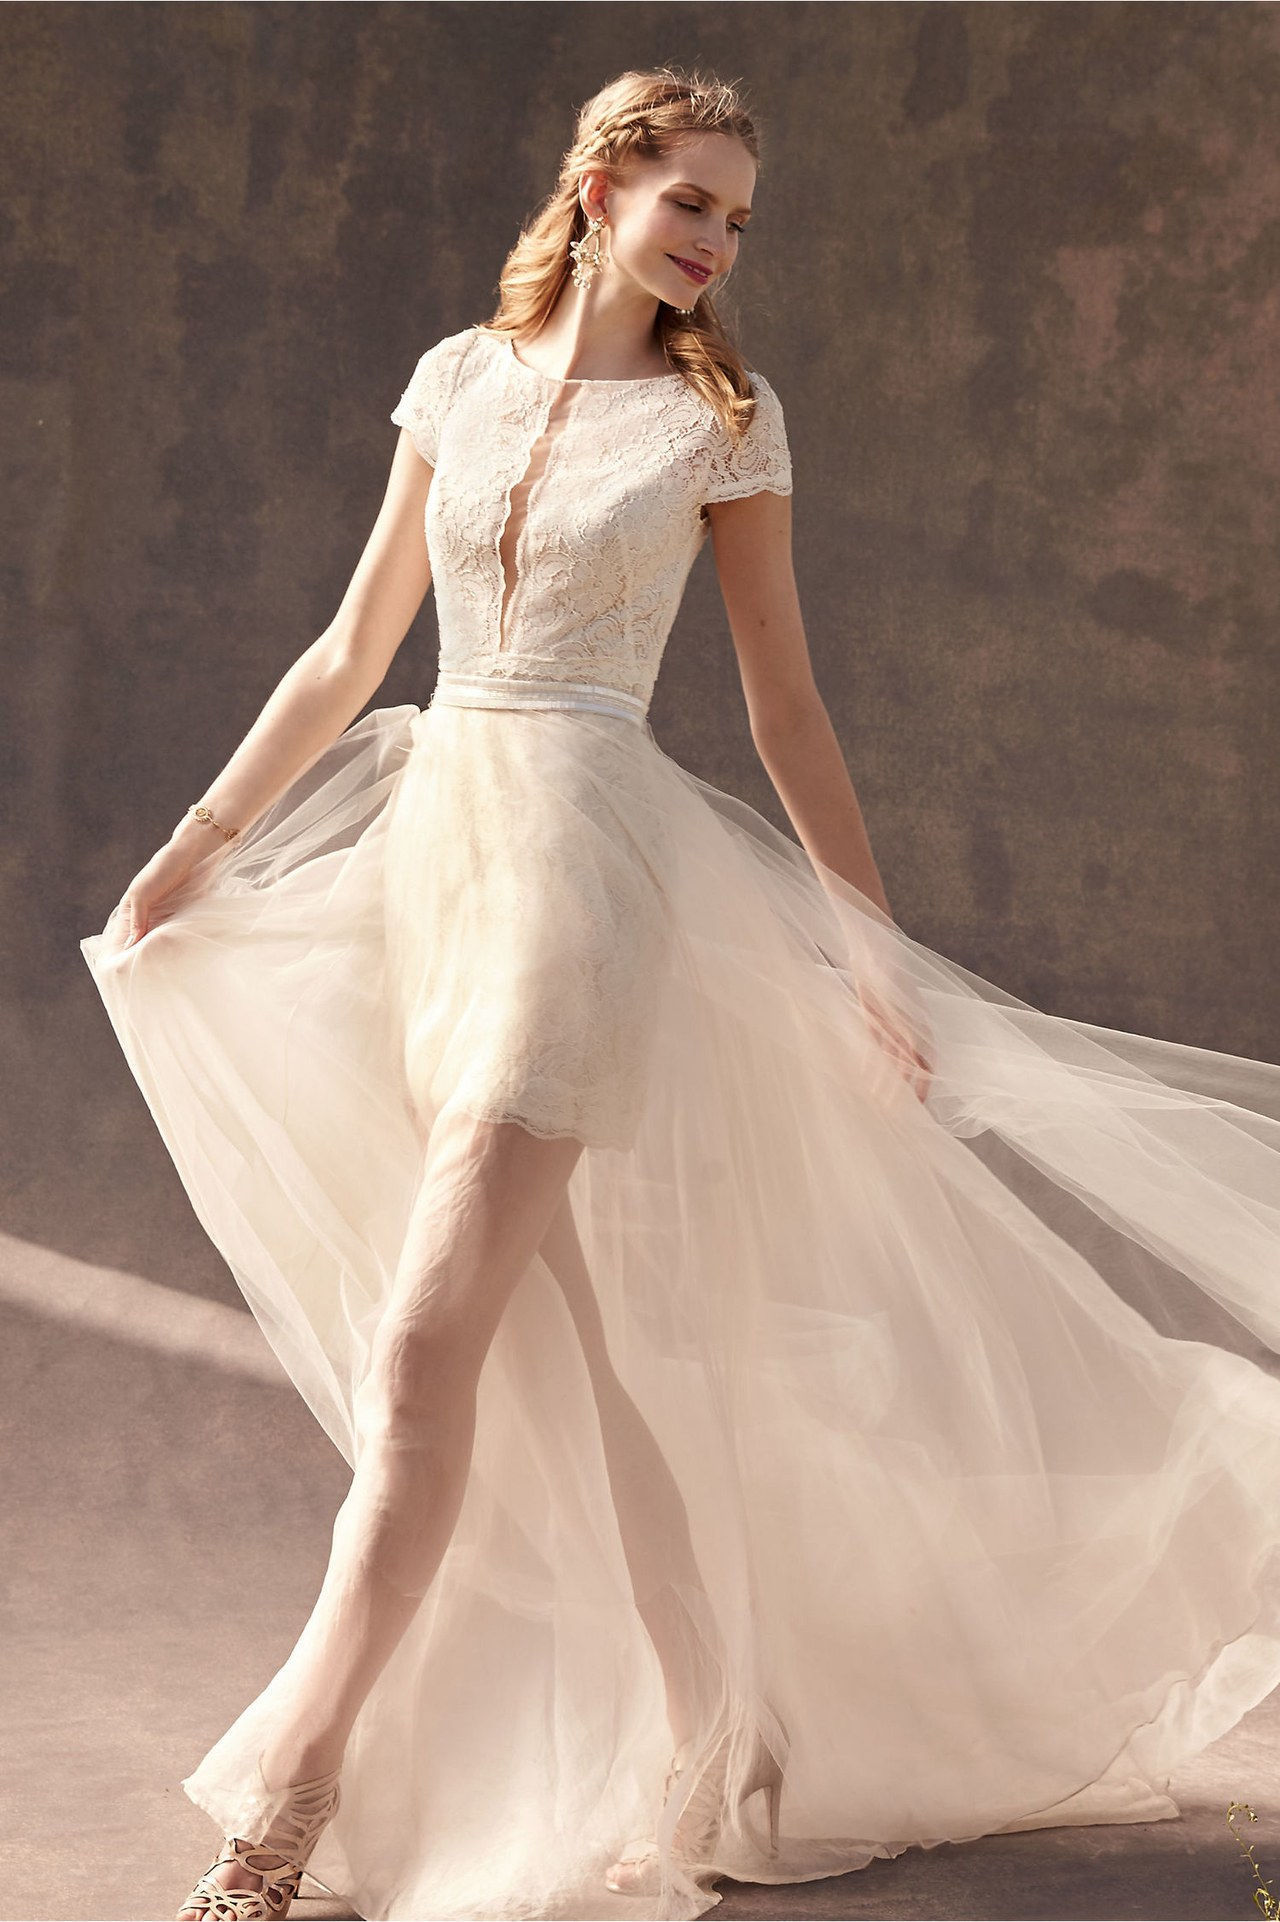 1 2 in 1 wedding dresses wedding gowns mix and match wedding dresses bhldn 0430 courtesy